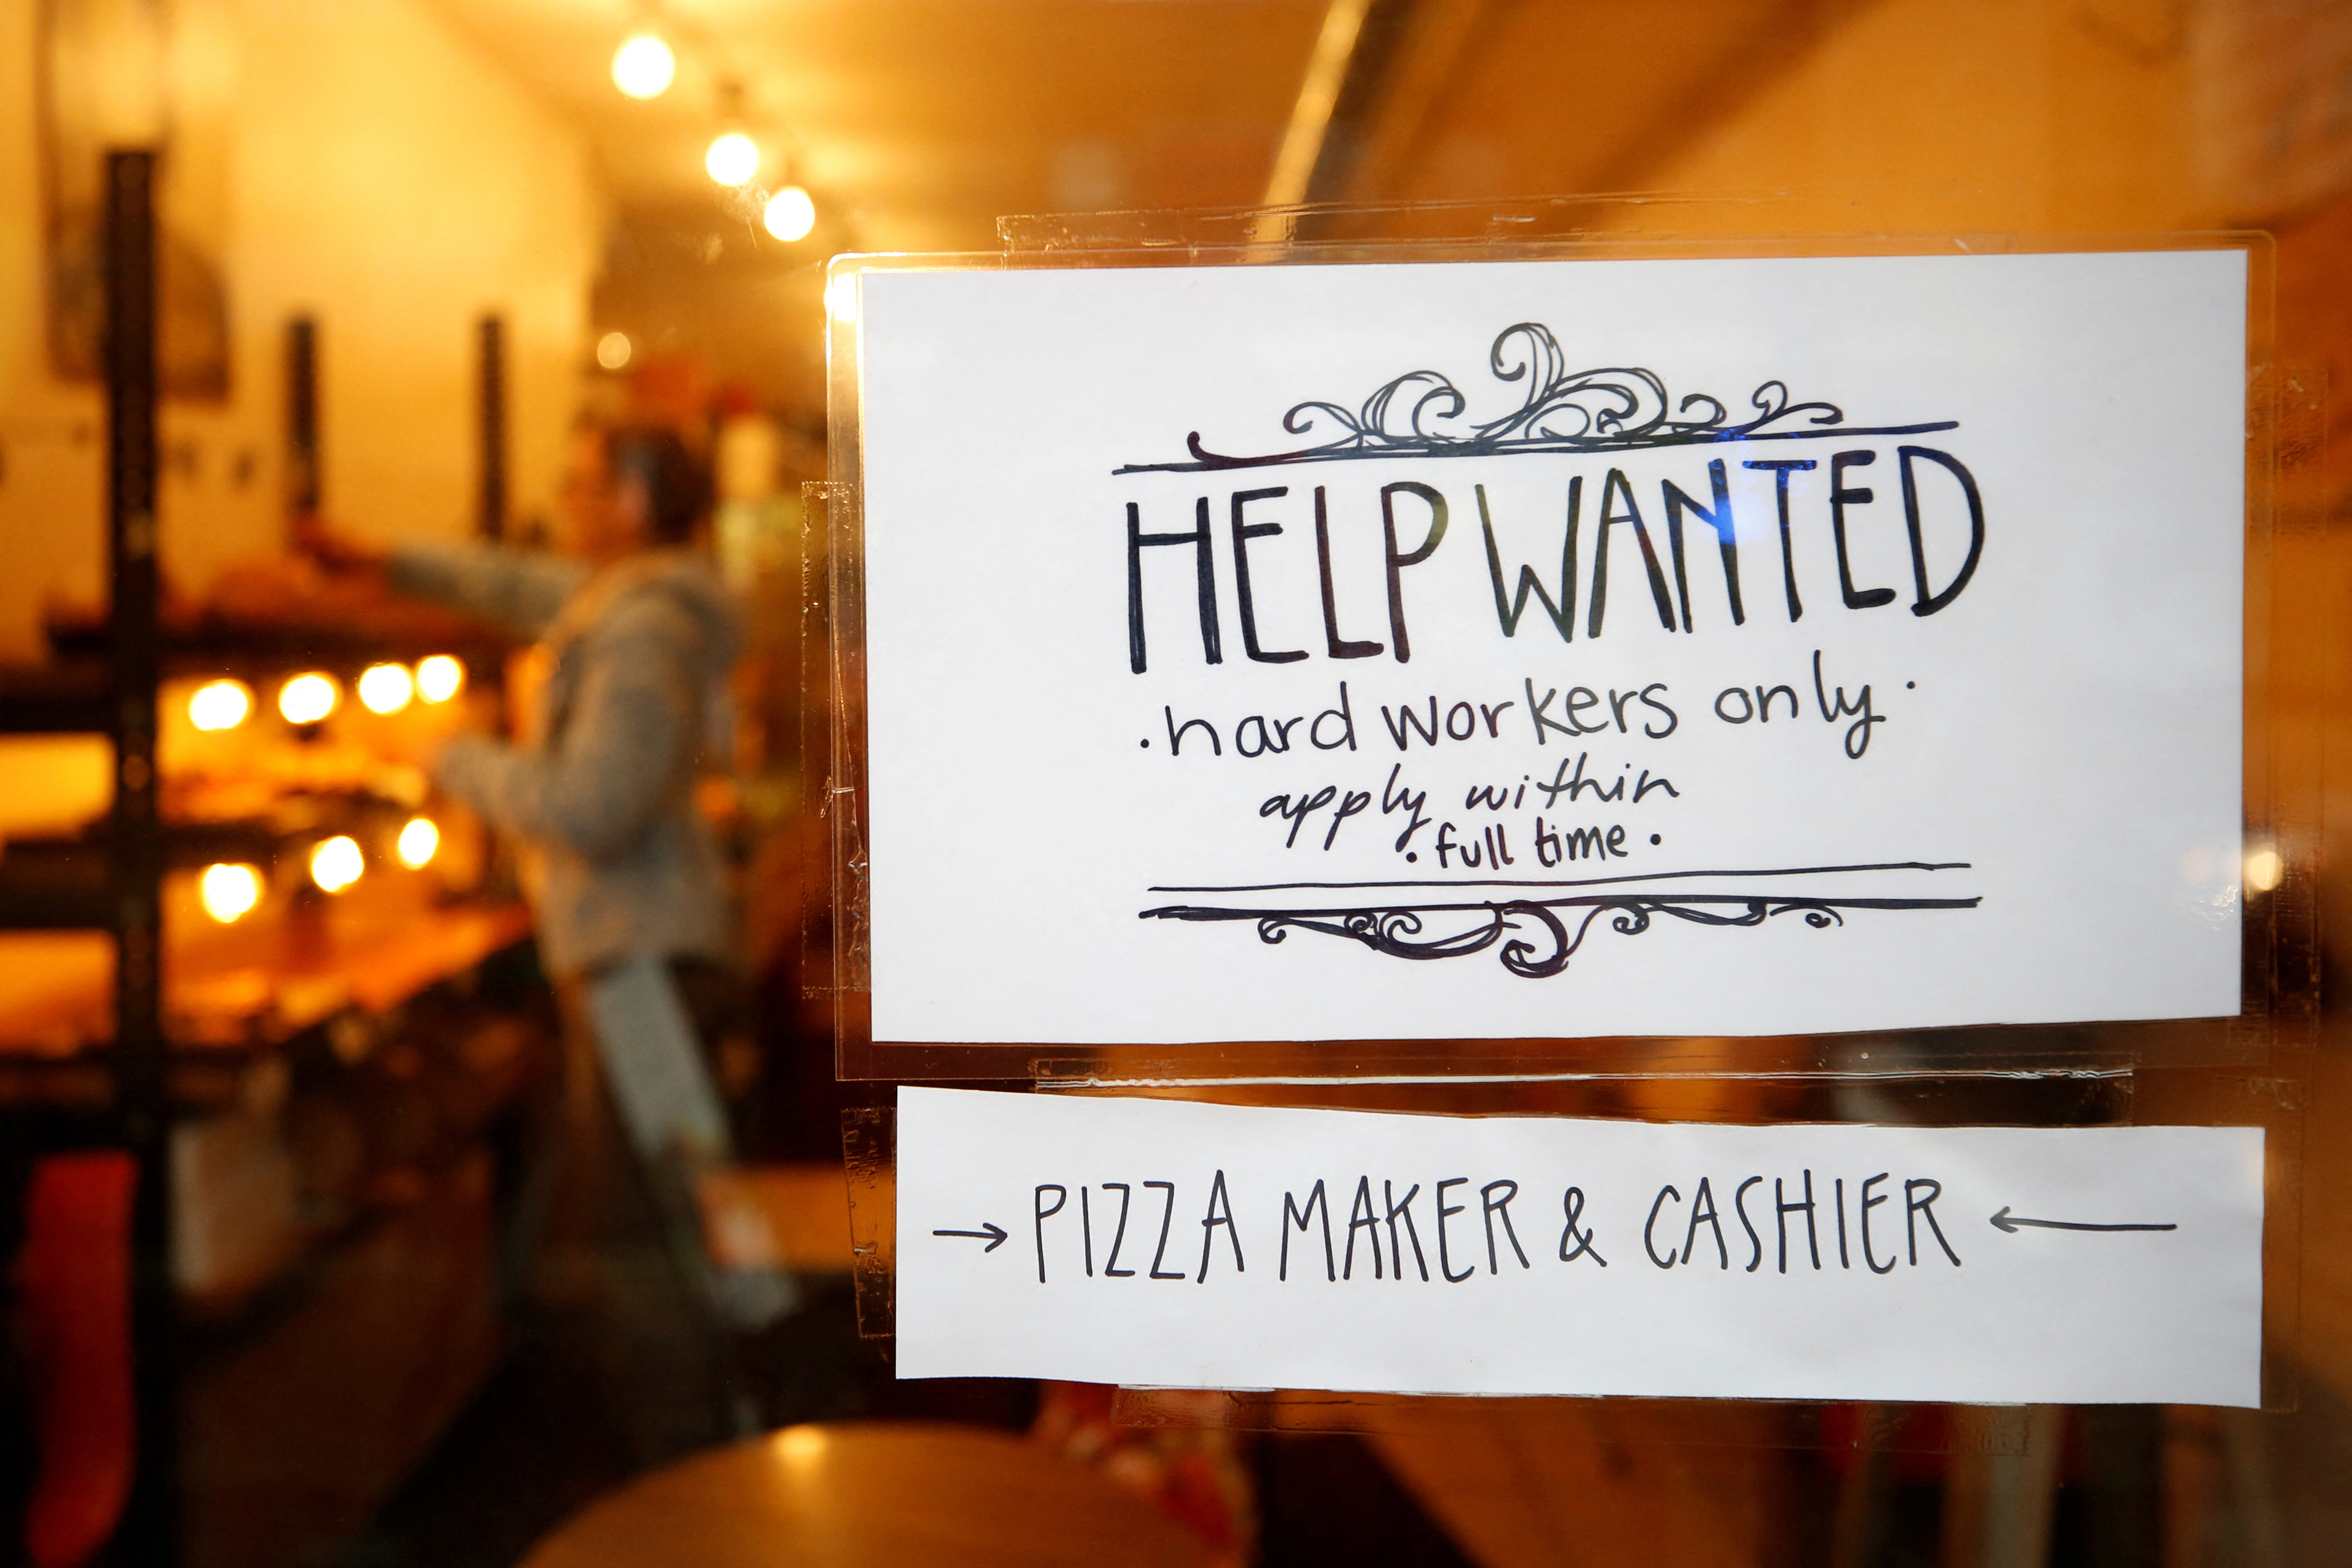 A "Help wanted" sign in the window of a bakery in Ottawa Canada